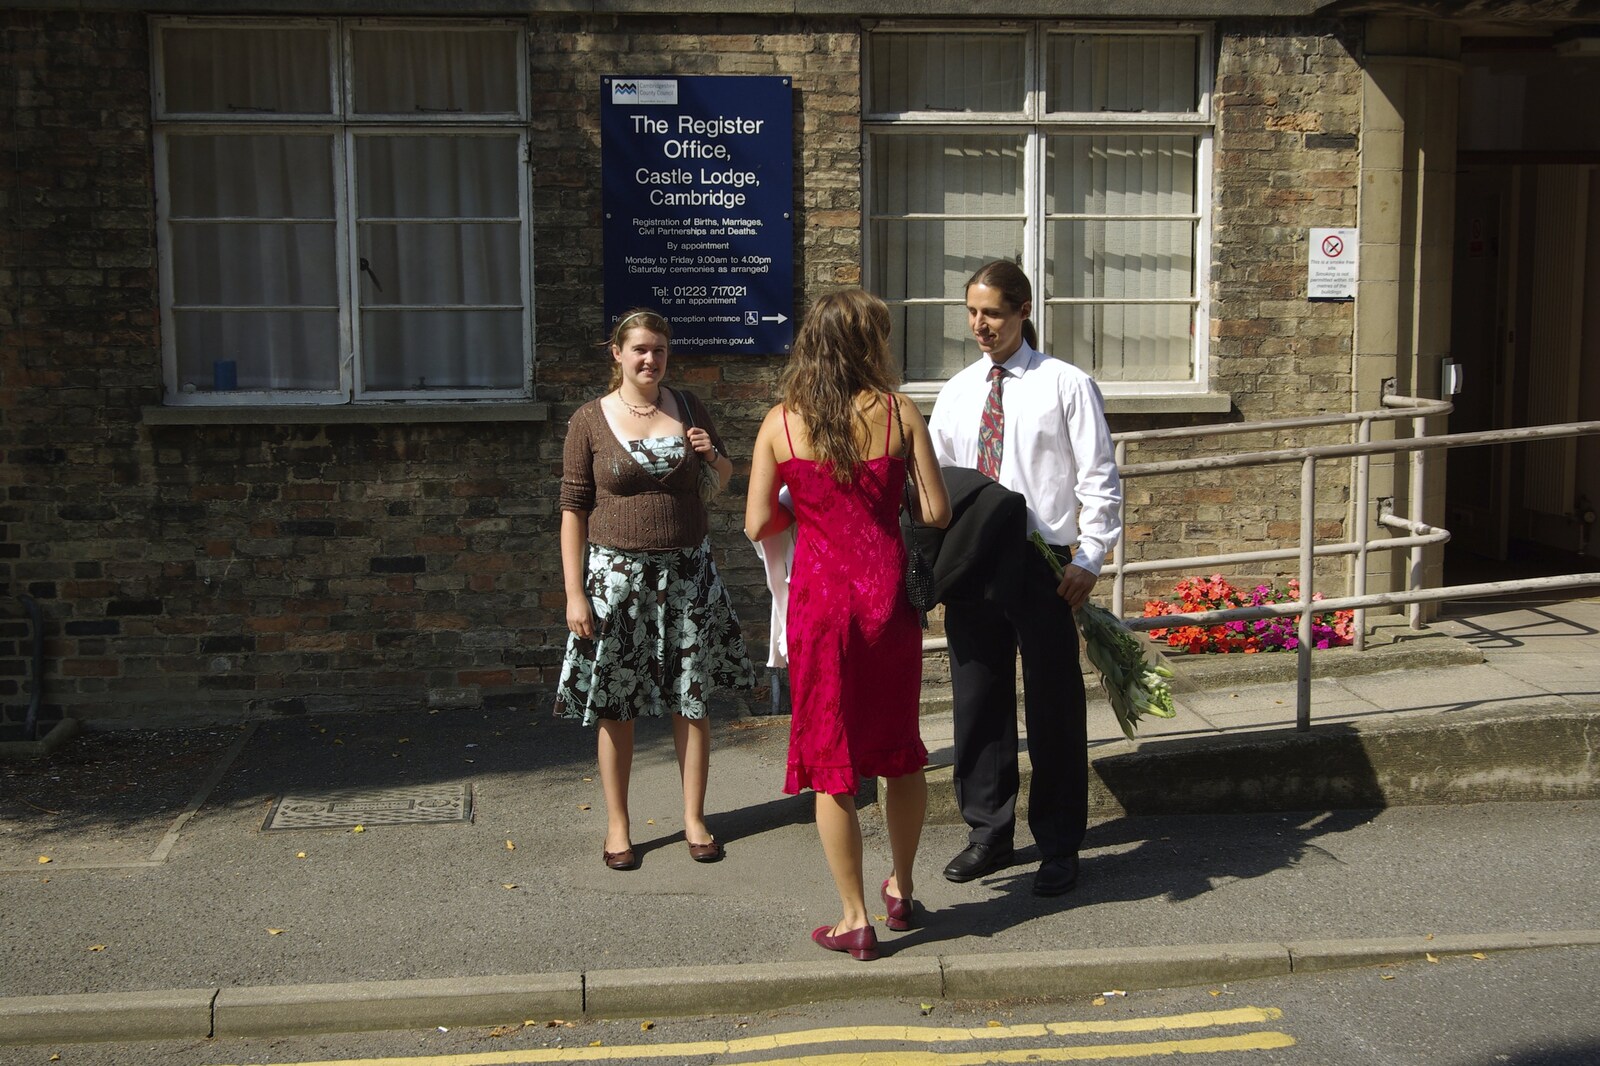 Liviu and Christina's Wedding Day, Babraham, Cambridge - 11th August 2007: Isobel, Nada and Liam mill around outside the Register Office